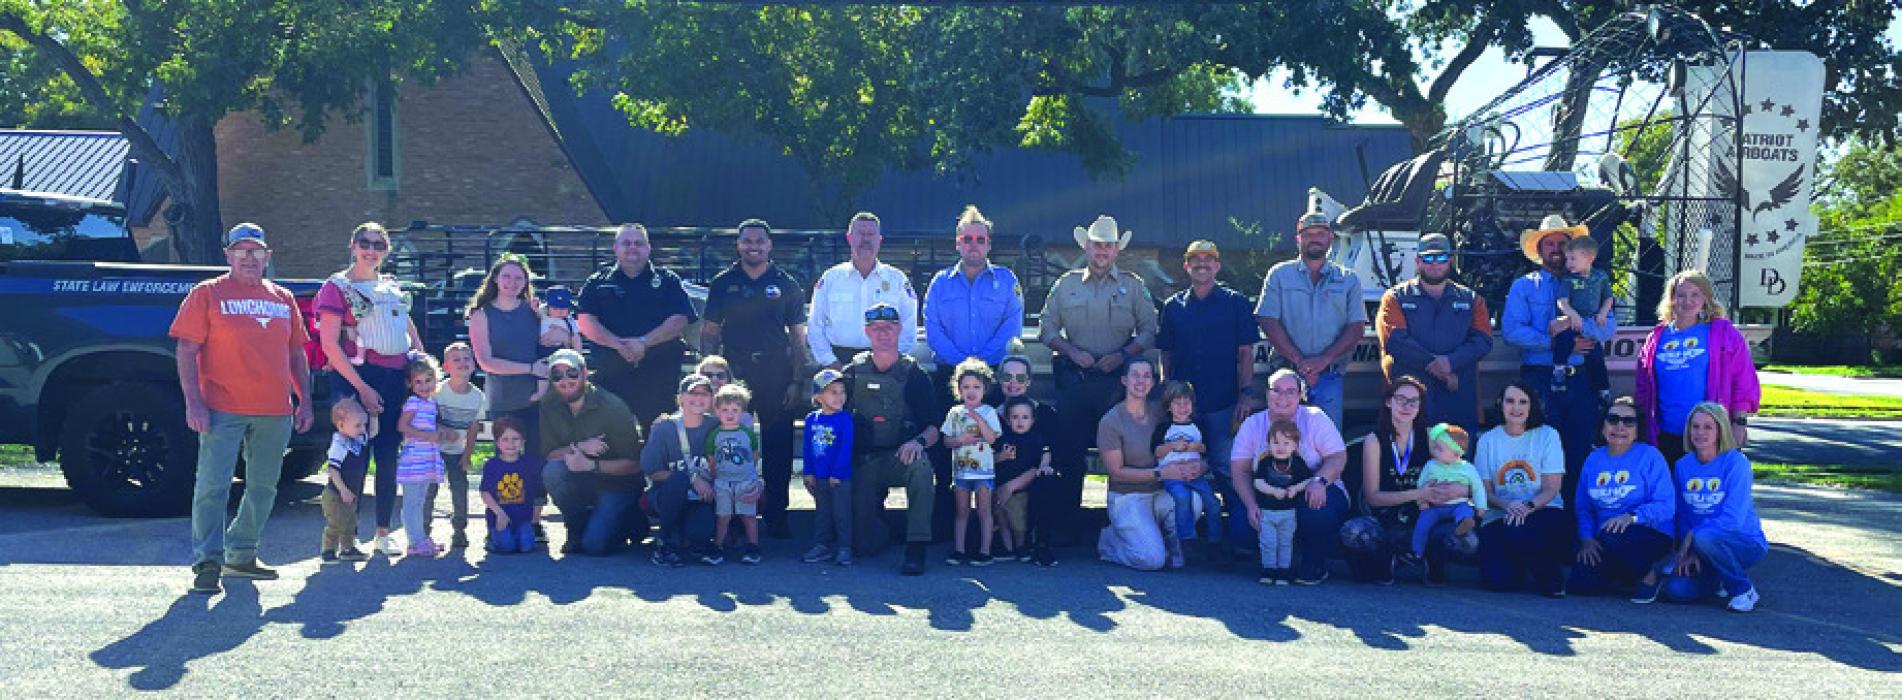 Preschool Holds ‘Truck Touch’ Event to Learn About Community Helpers